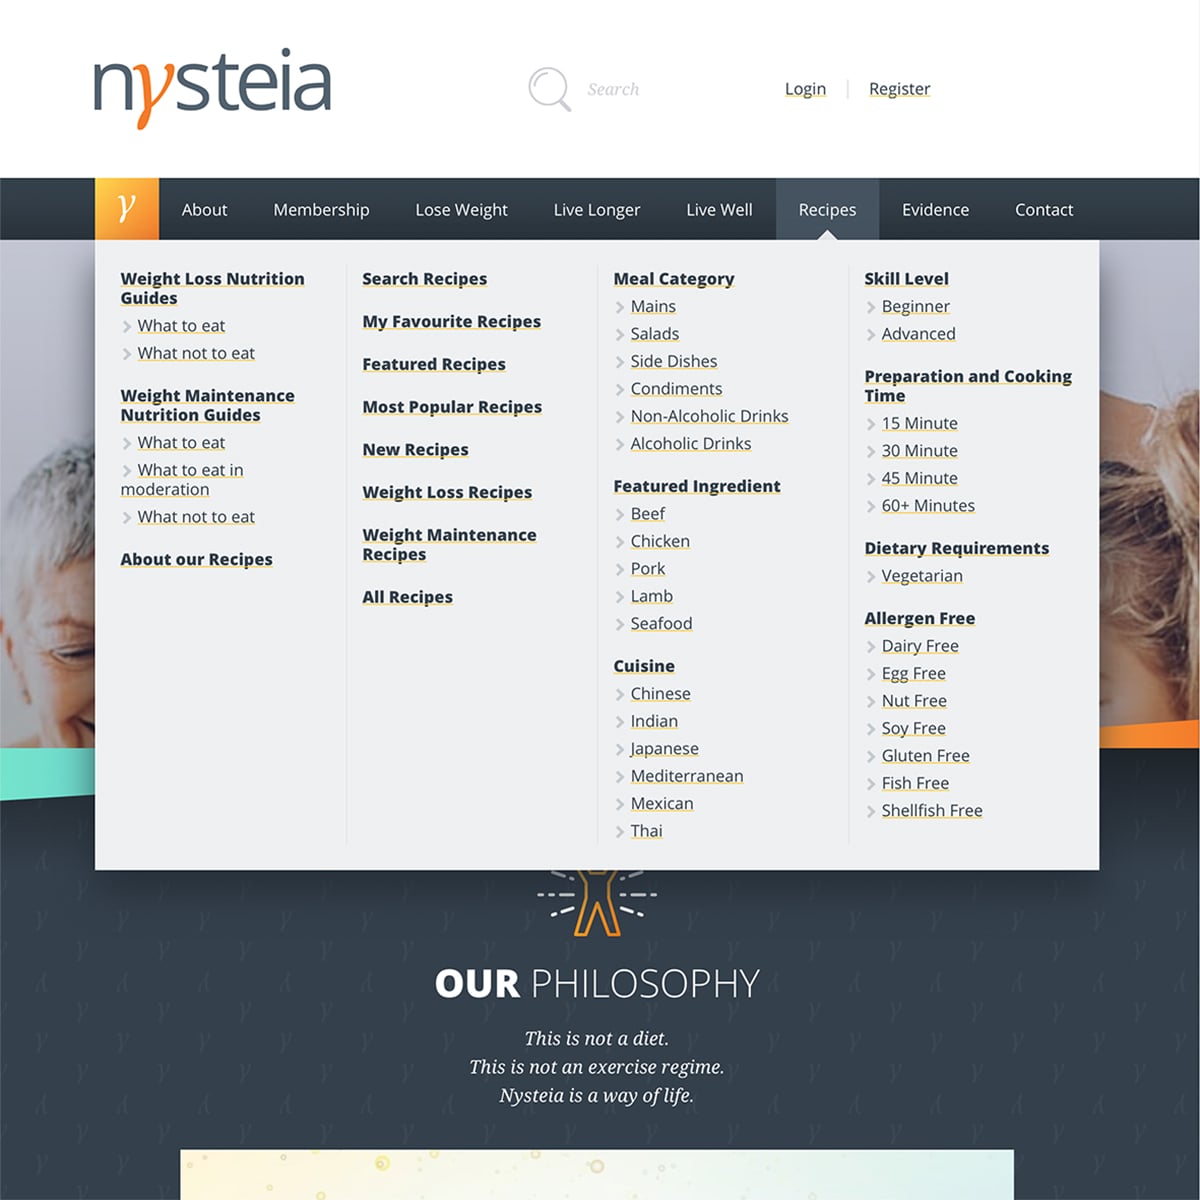 Nysteia Homepage - showing "mega-menu" style that links to dynamic pages based on categorisation of content items.